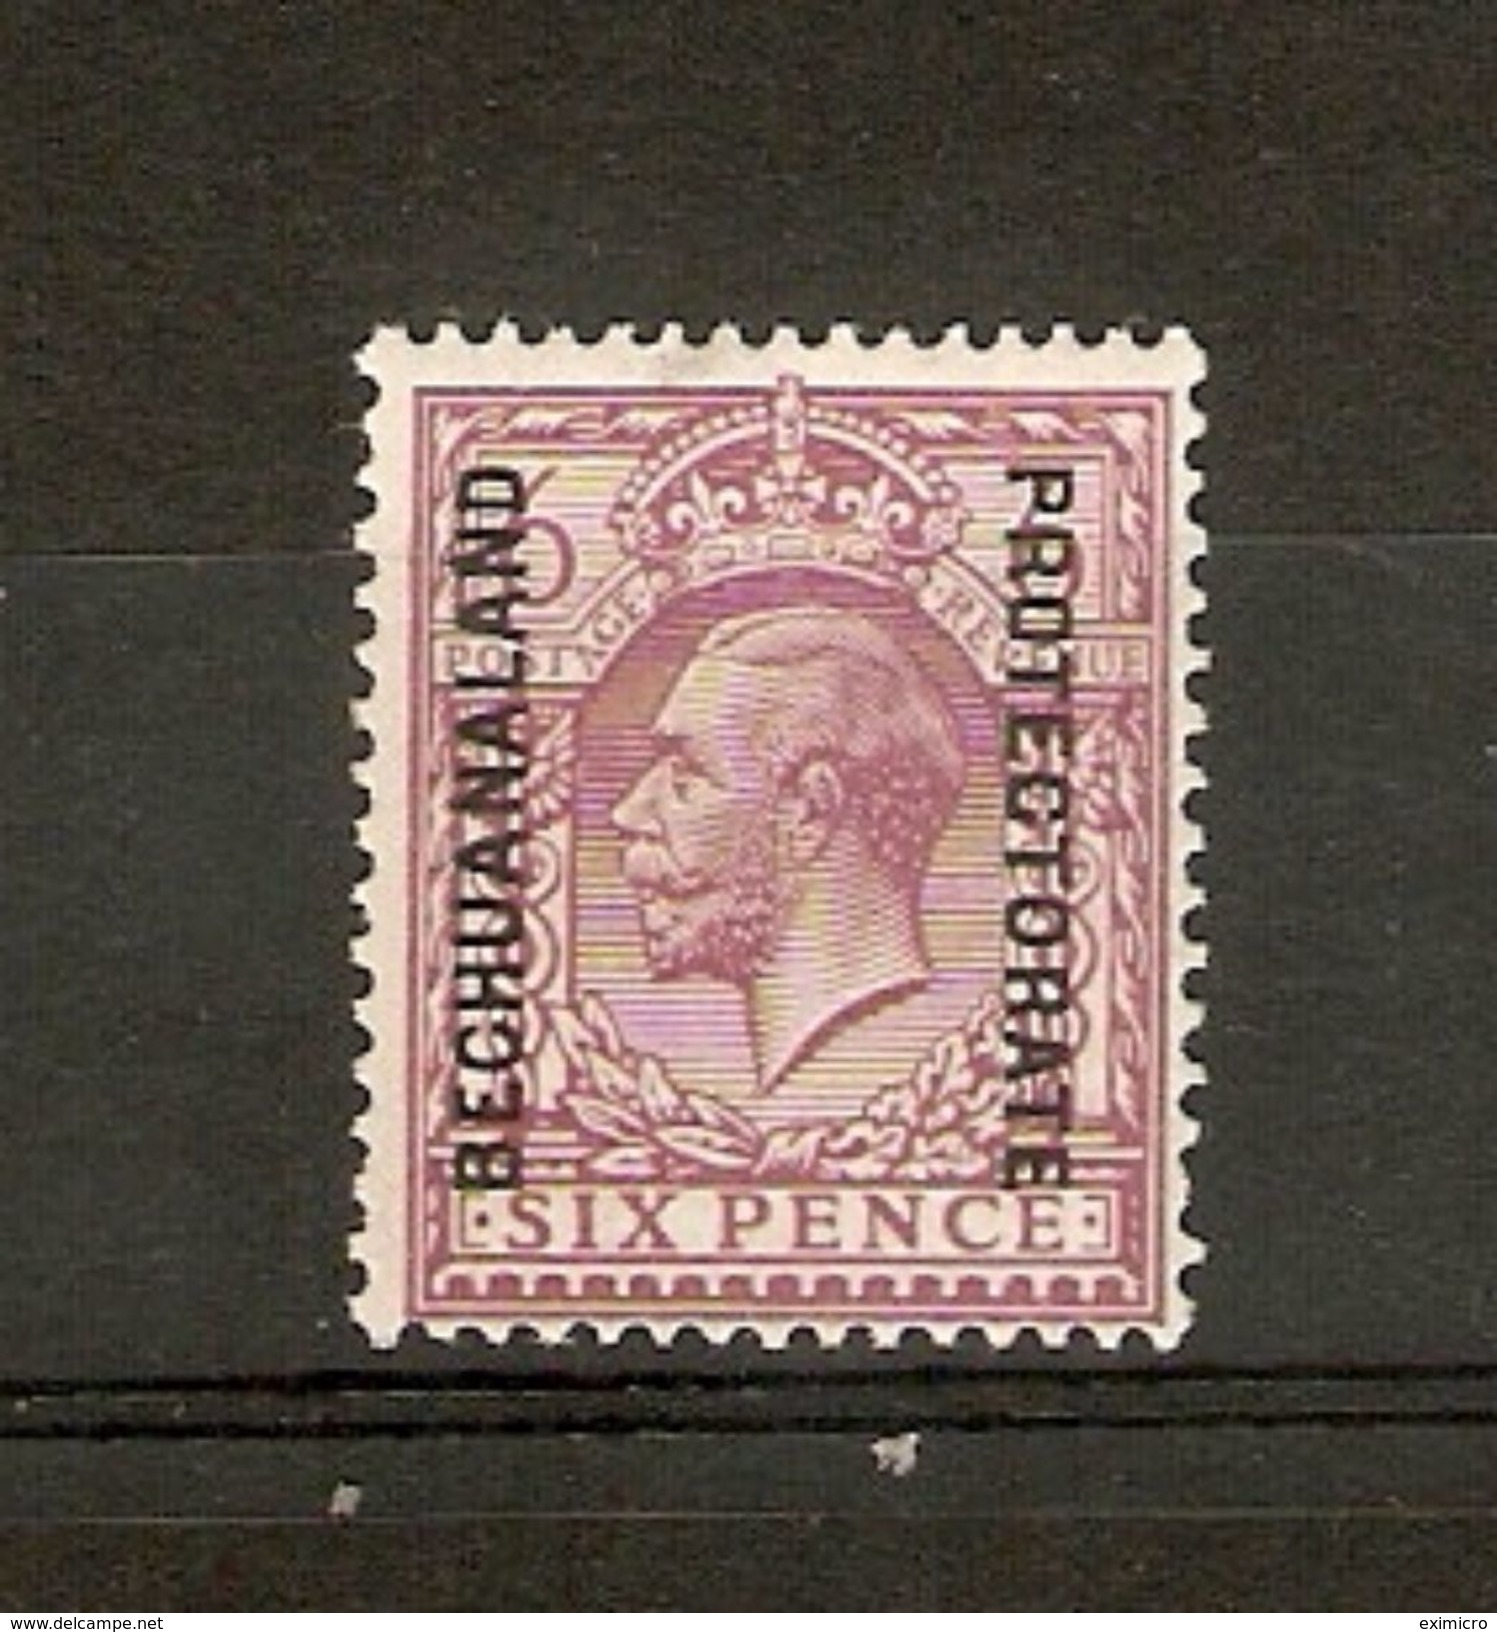 BECHUANALAND 1925 6d REDDISH PURPLE (chalk - Surfaced Paper) SG 96 WATERMARK BLOCK CYPHER LIGHTLY MOUNTED MINT Cat £75 - 1885-1964 Bechuanaland Protectorate